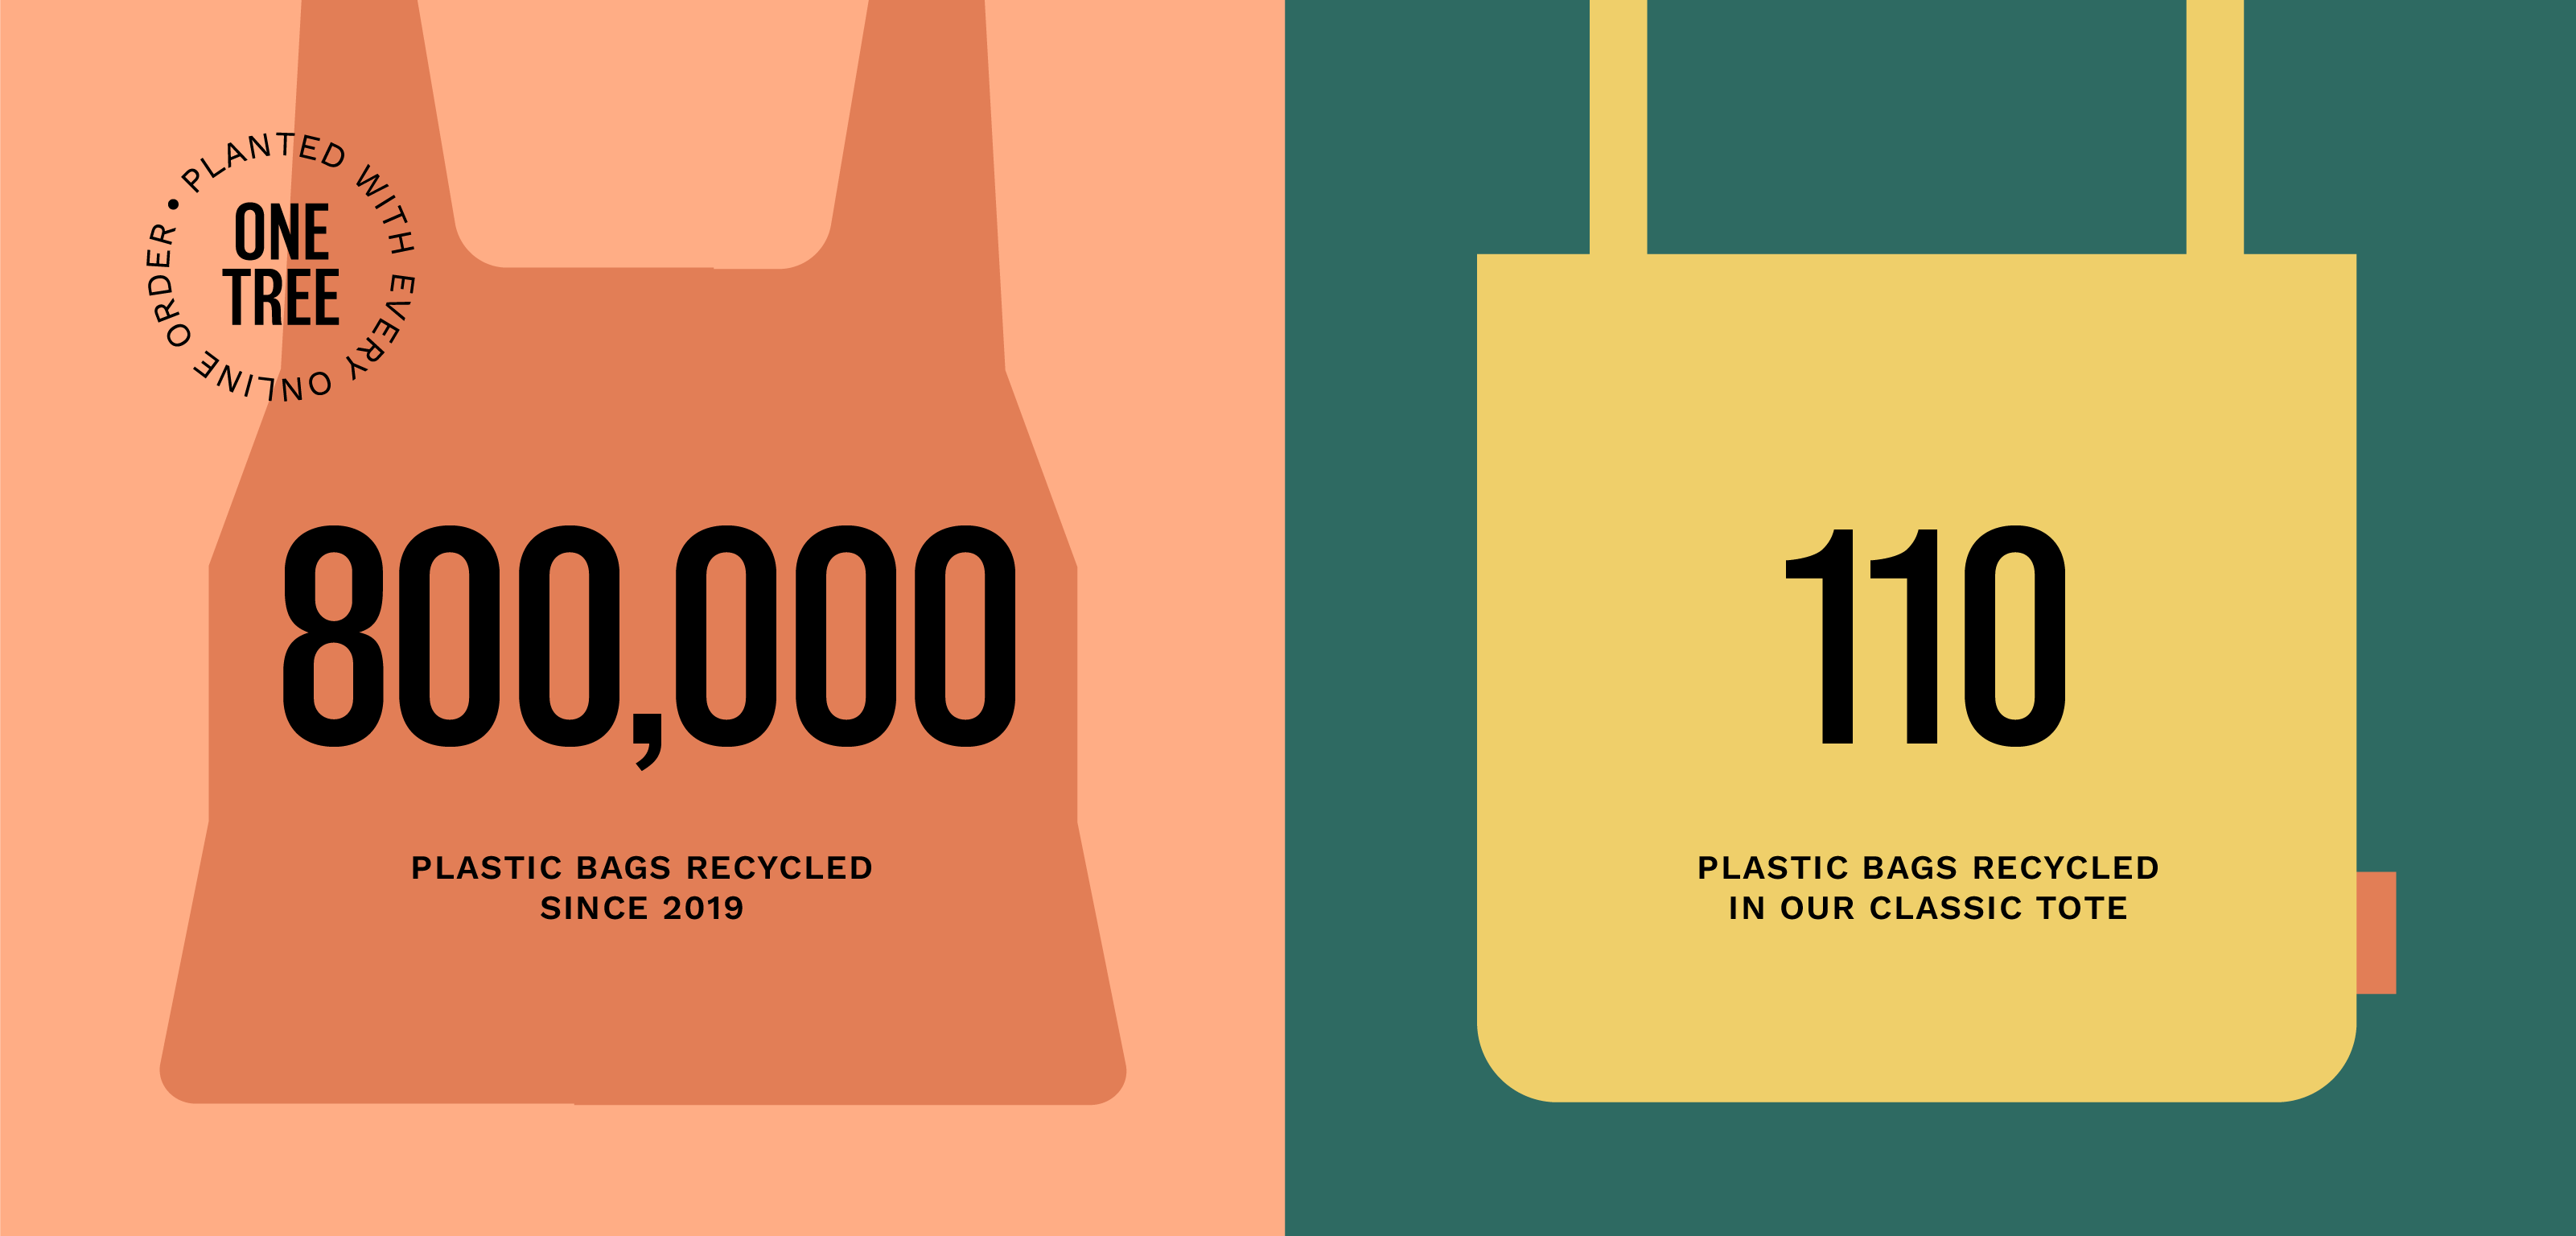 800,000 plastic bags recycled since 2019. 110 plastic bags recycled in our Classic Tote.